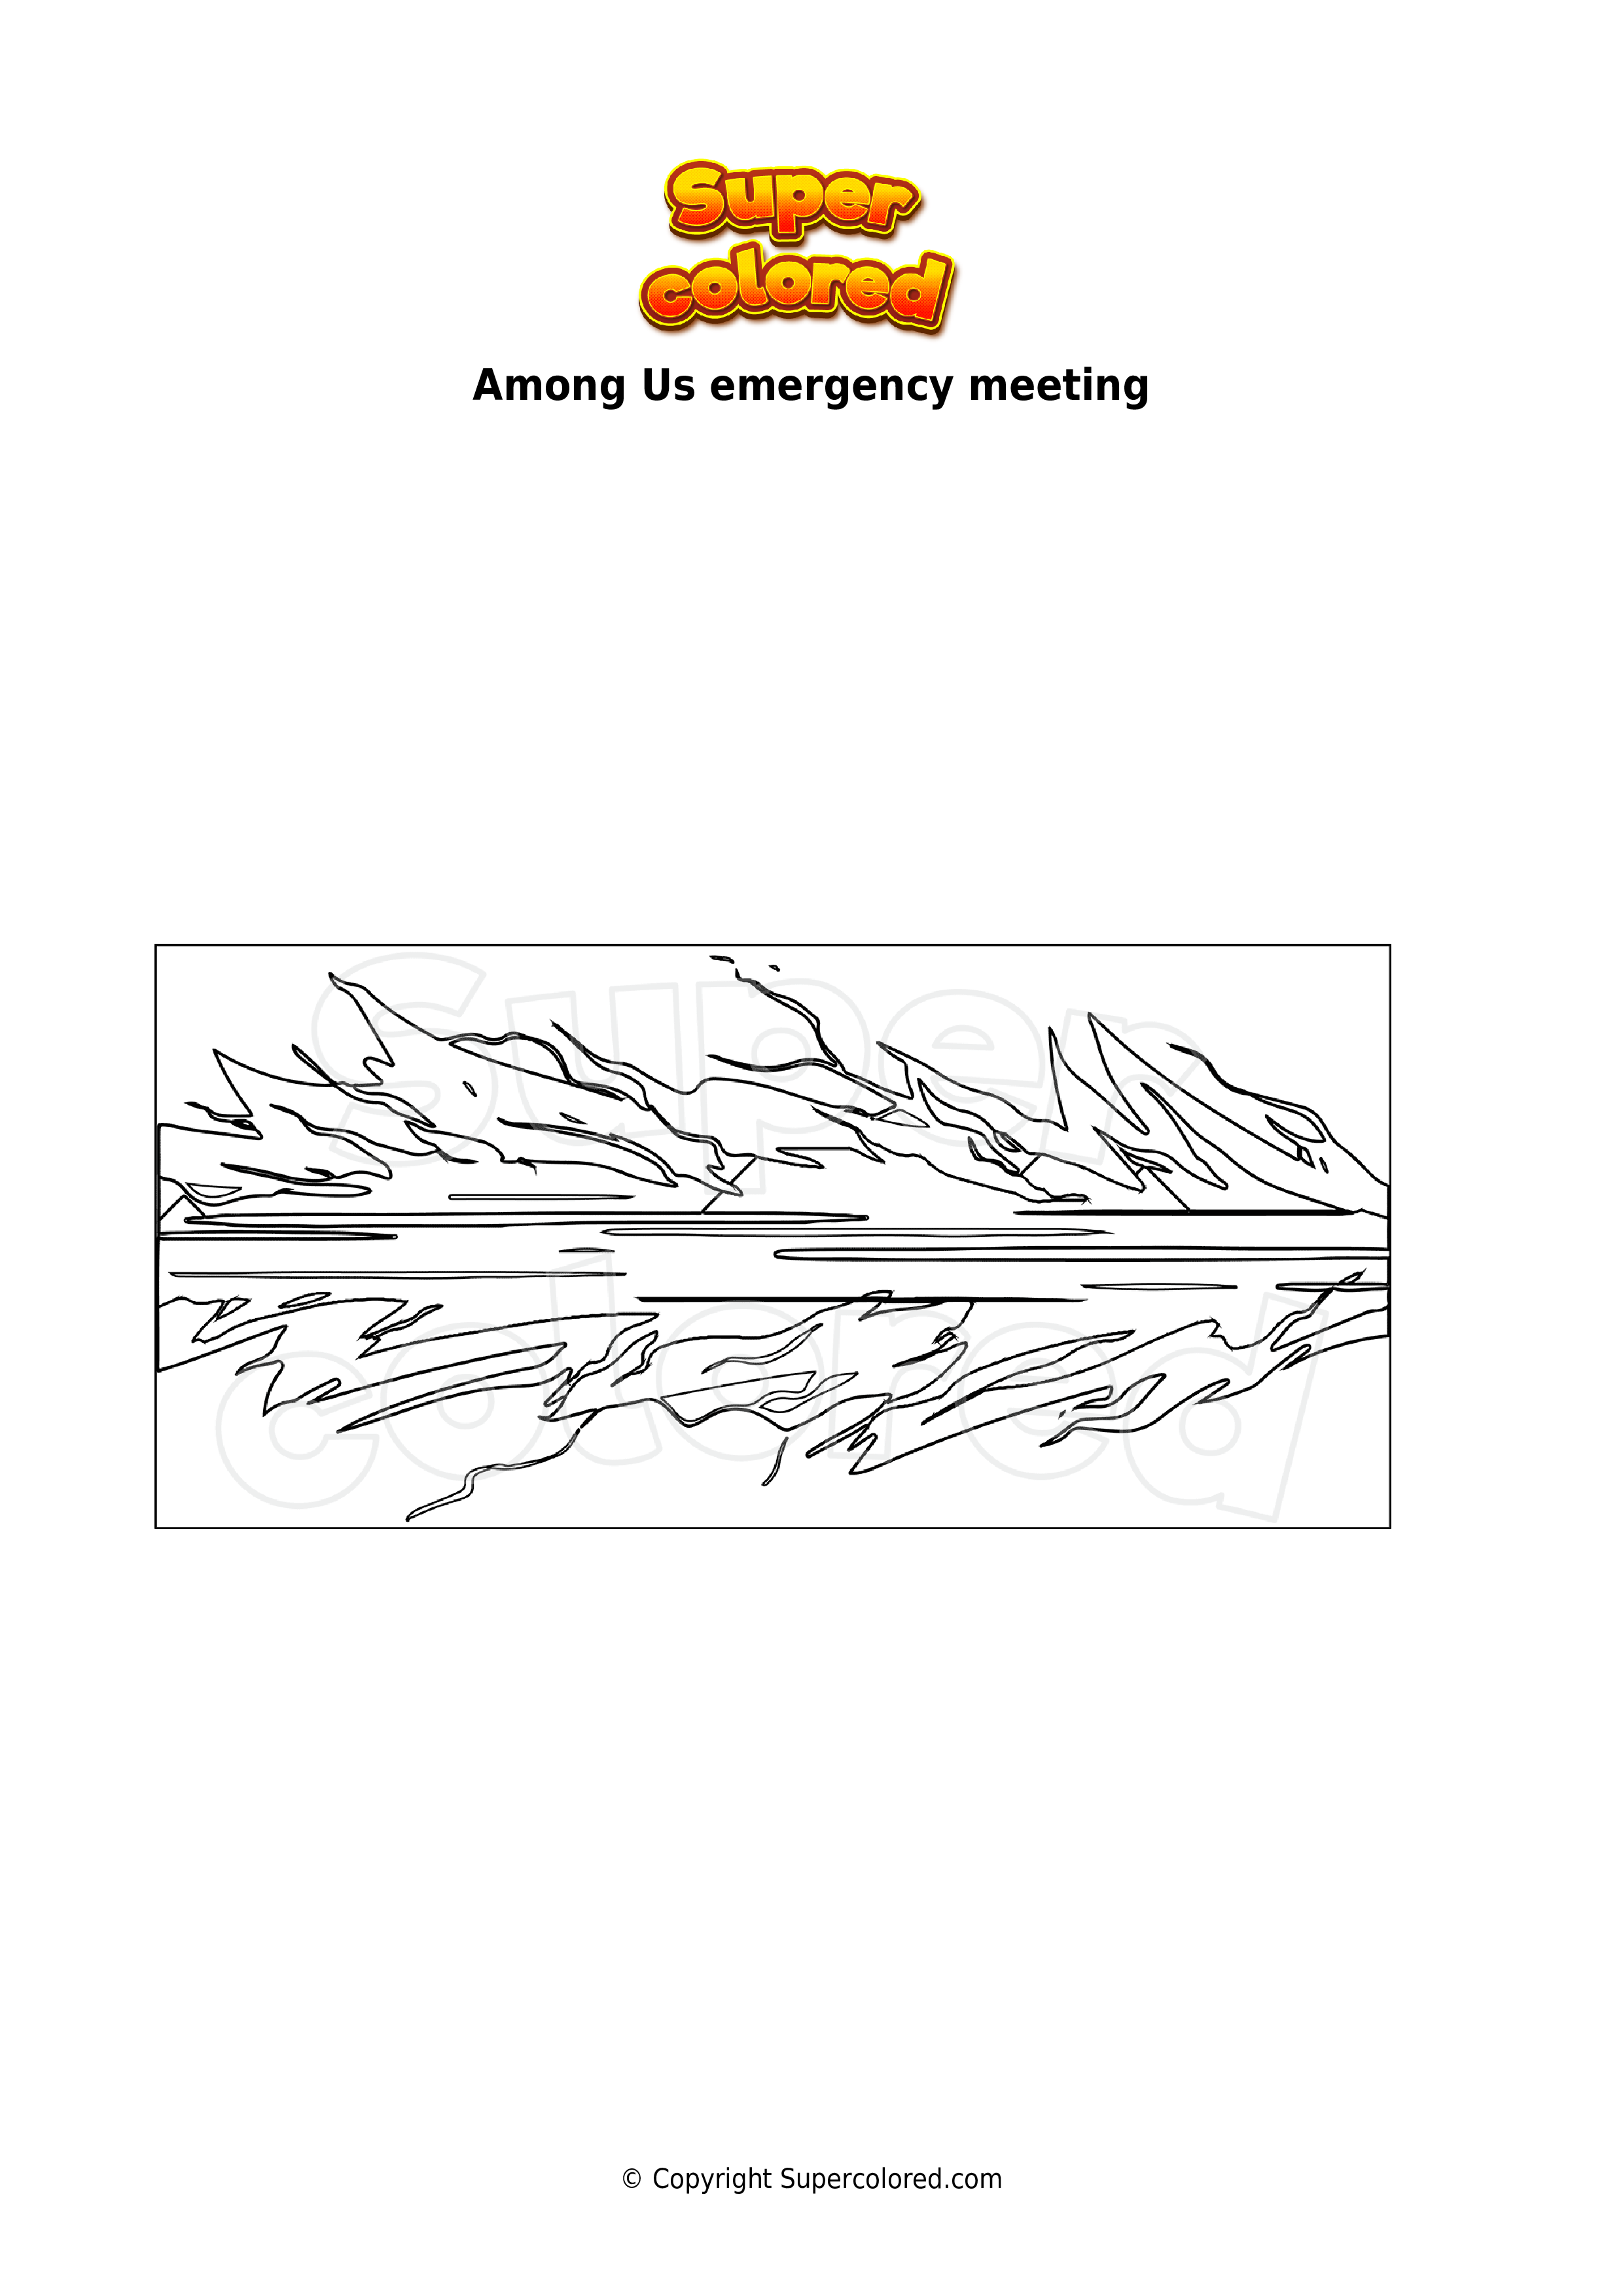 Coloring page Among Us emergency meeting   Supercolored.com